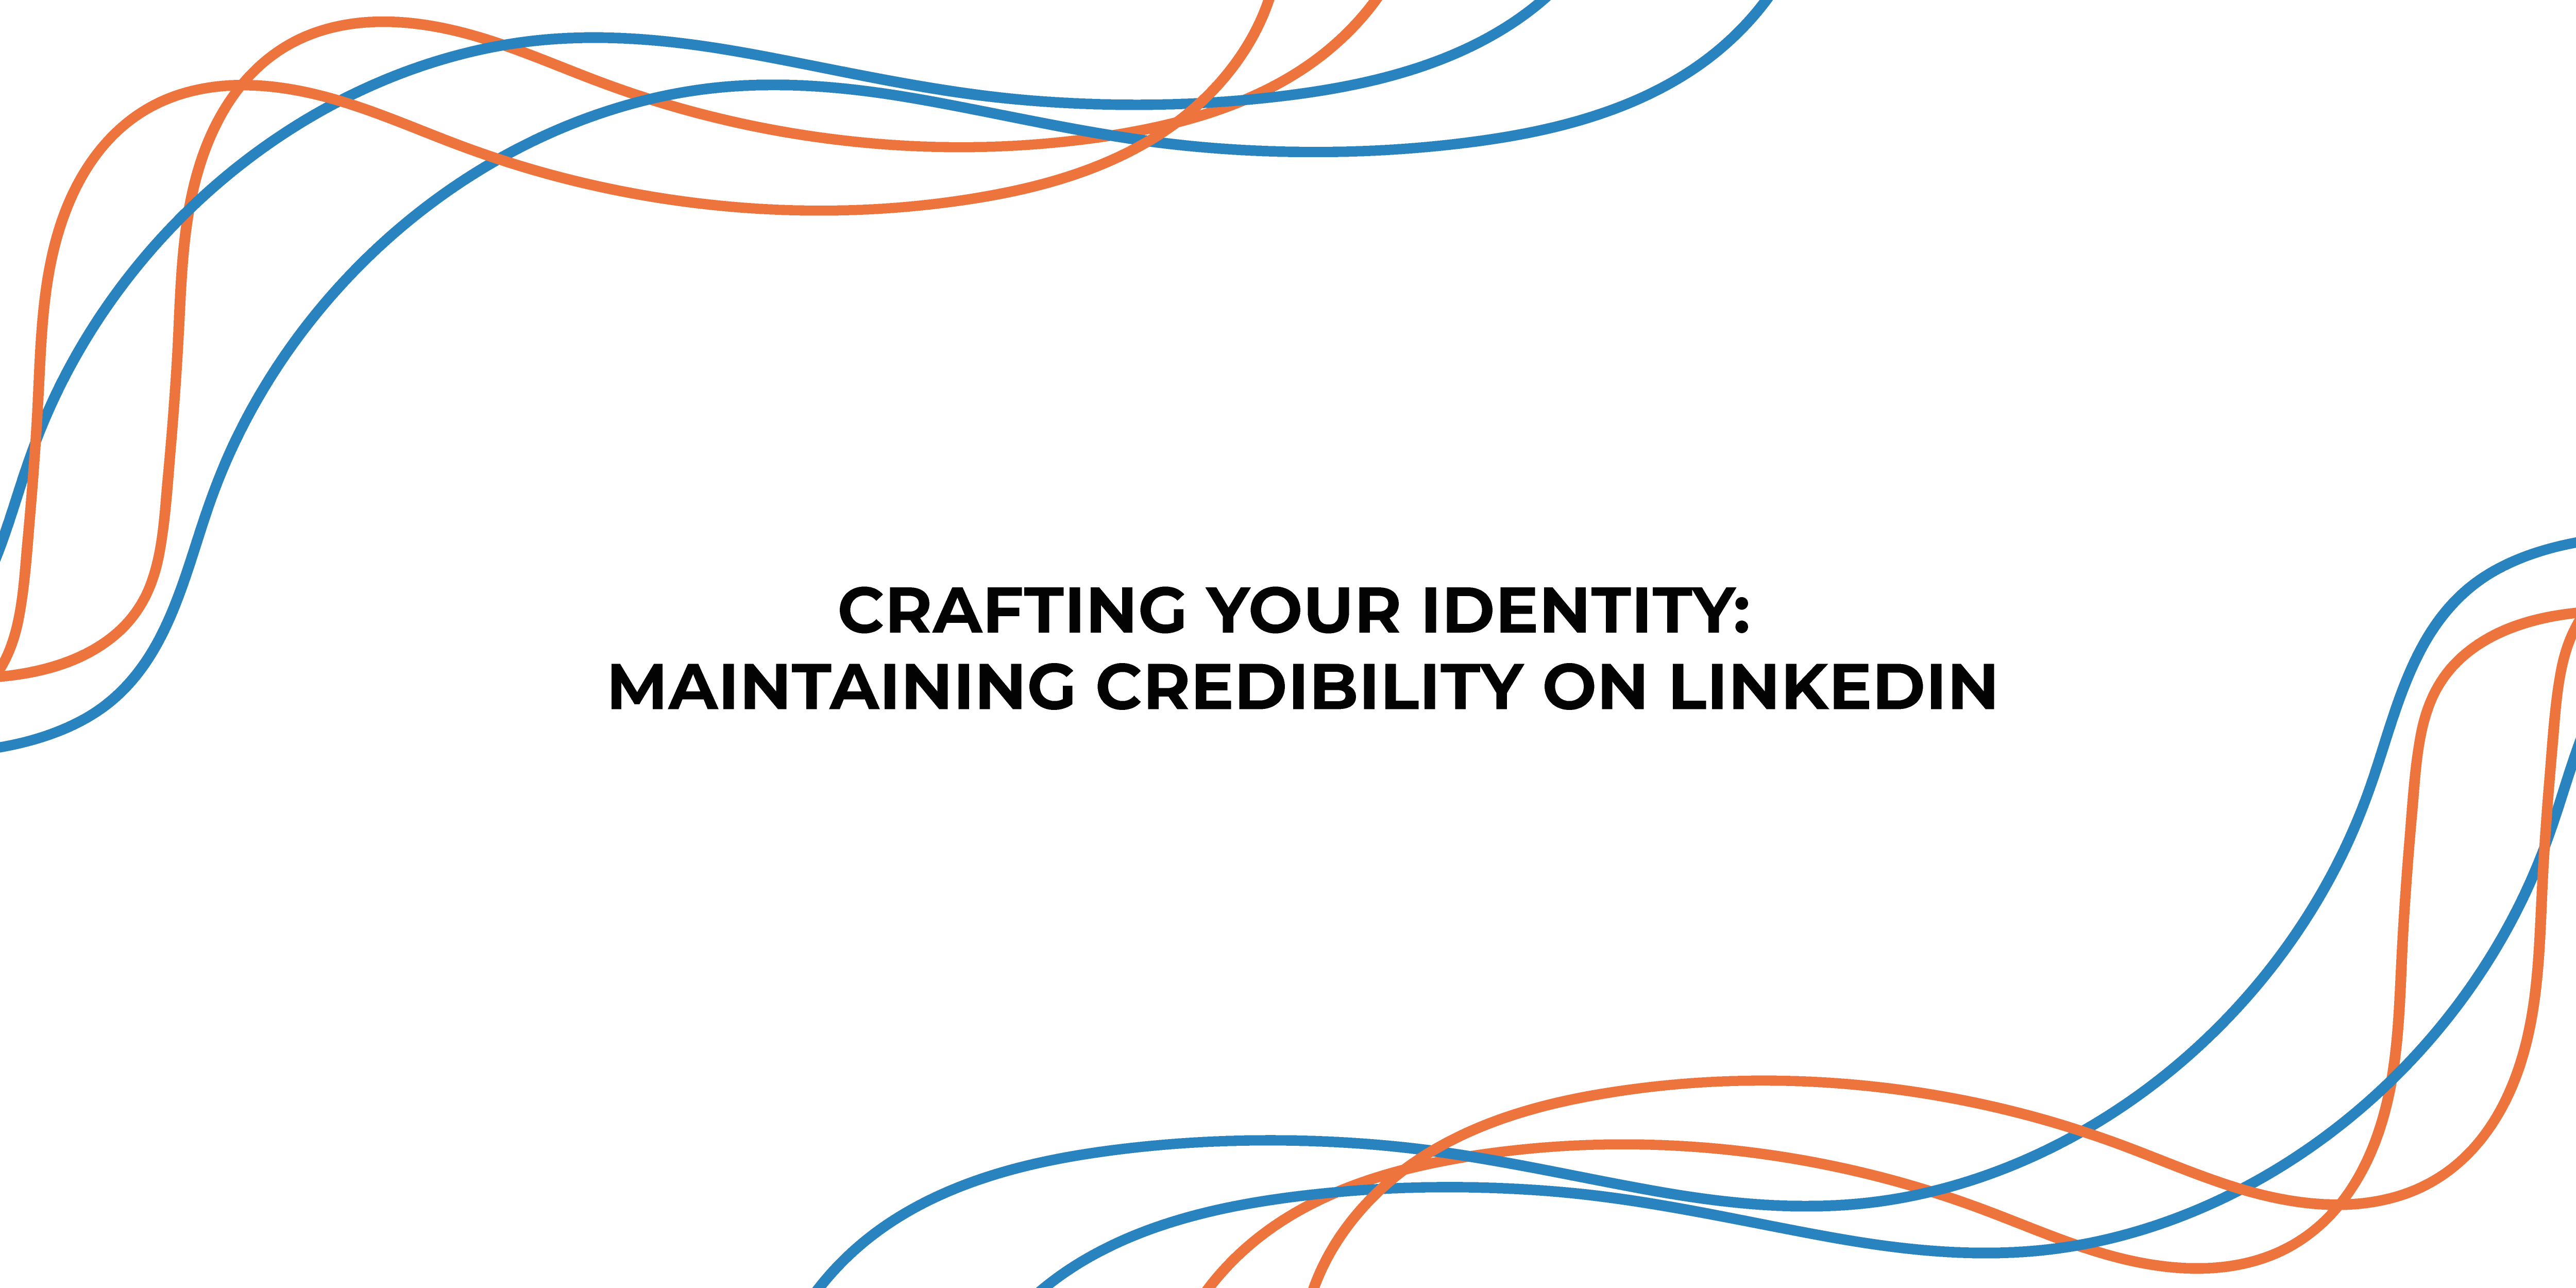 Crafting Your Identity: Maintaining Credibility on LinkedIn